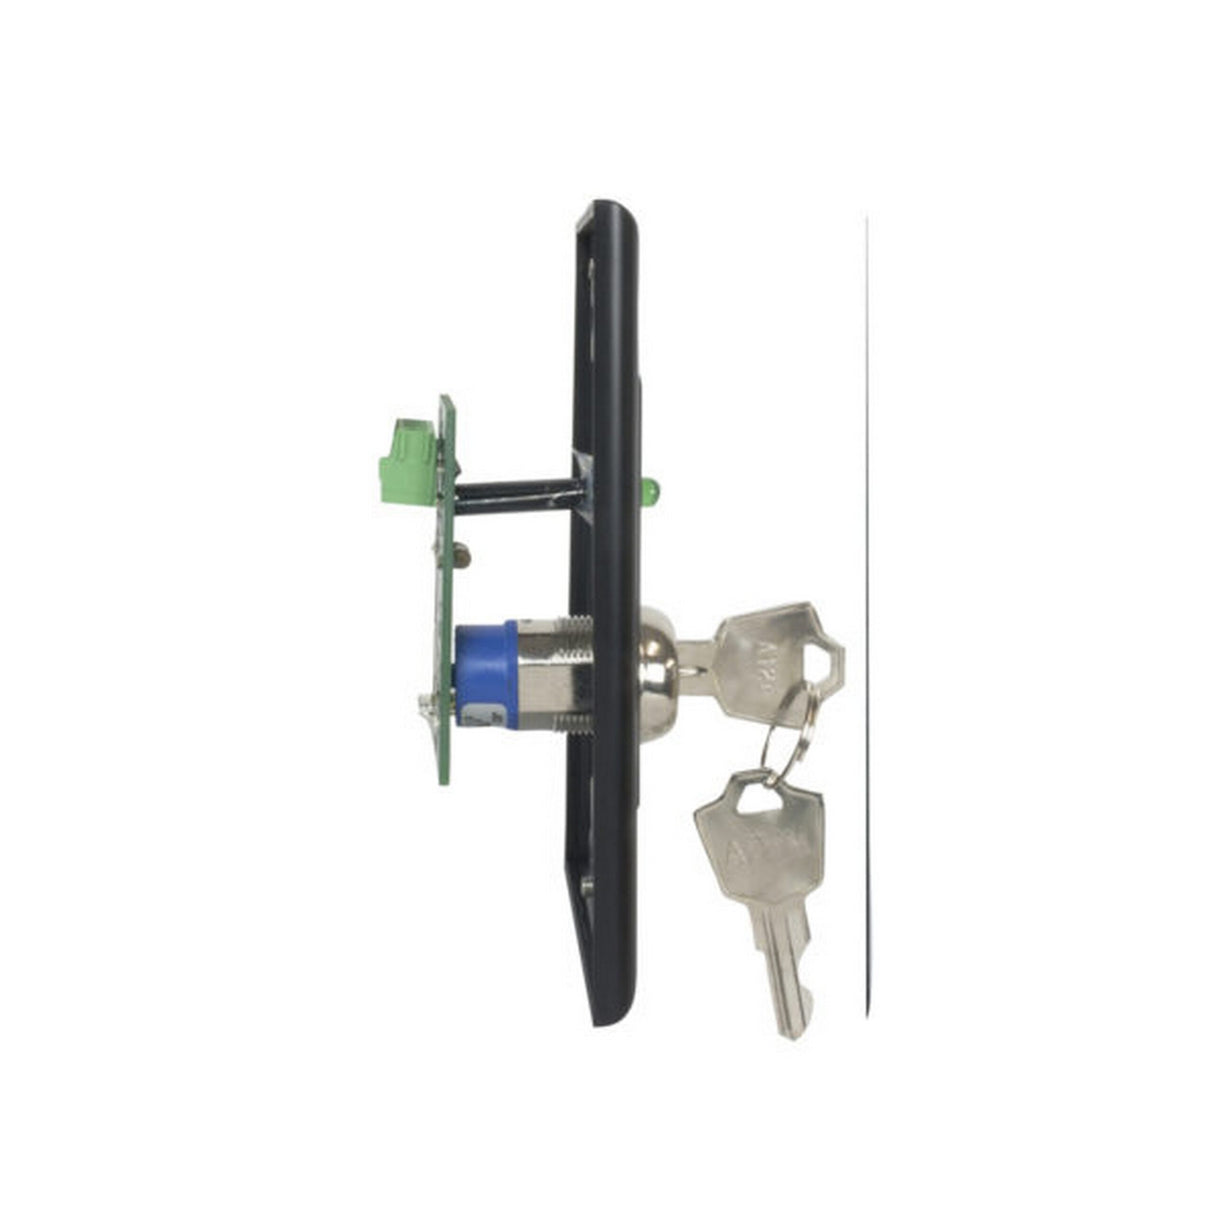 Lowell RPSB-MKP Momentary SPST Low-Voltage Key Switch